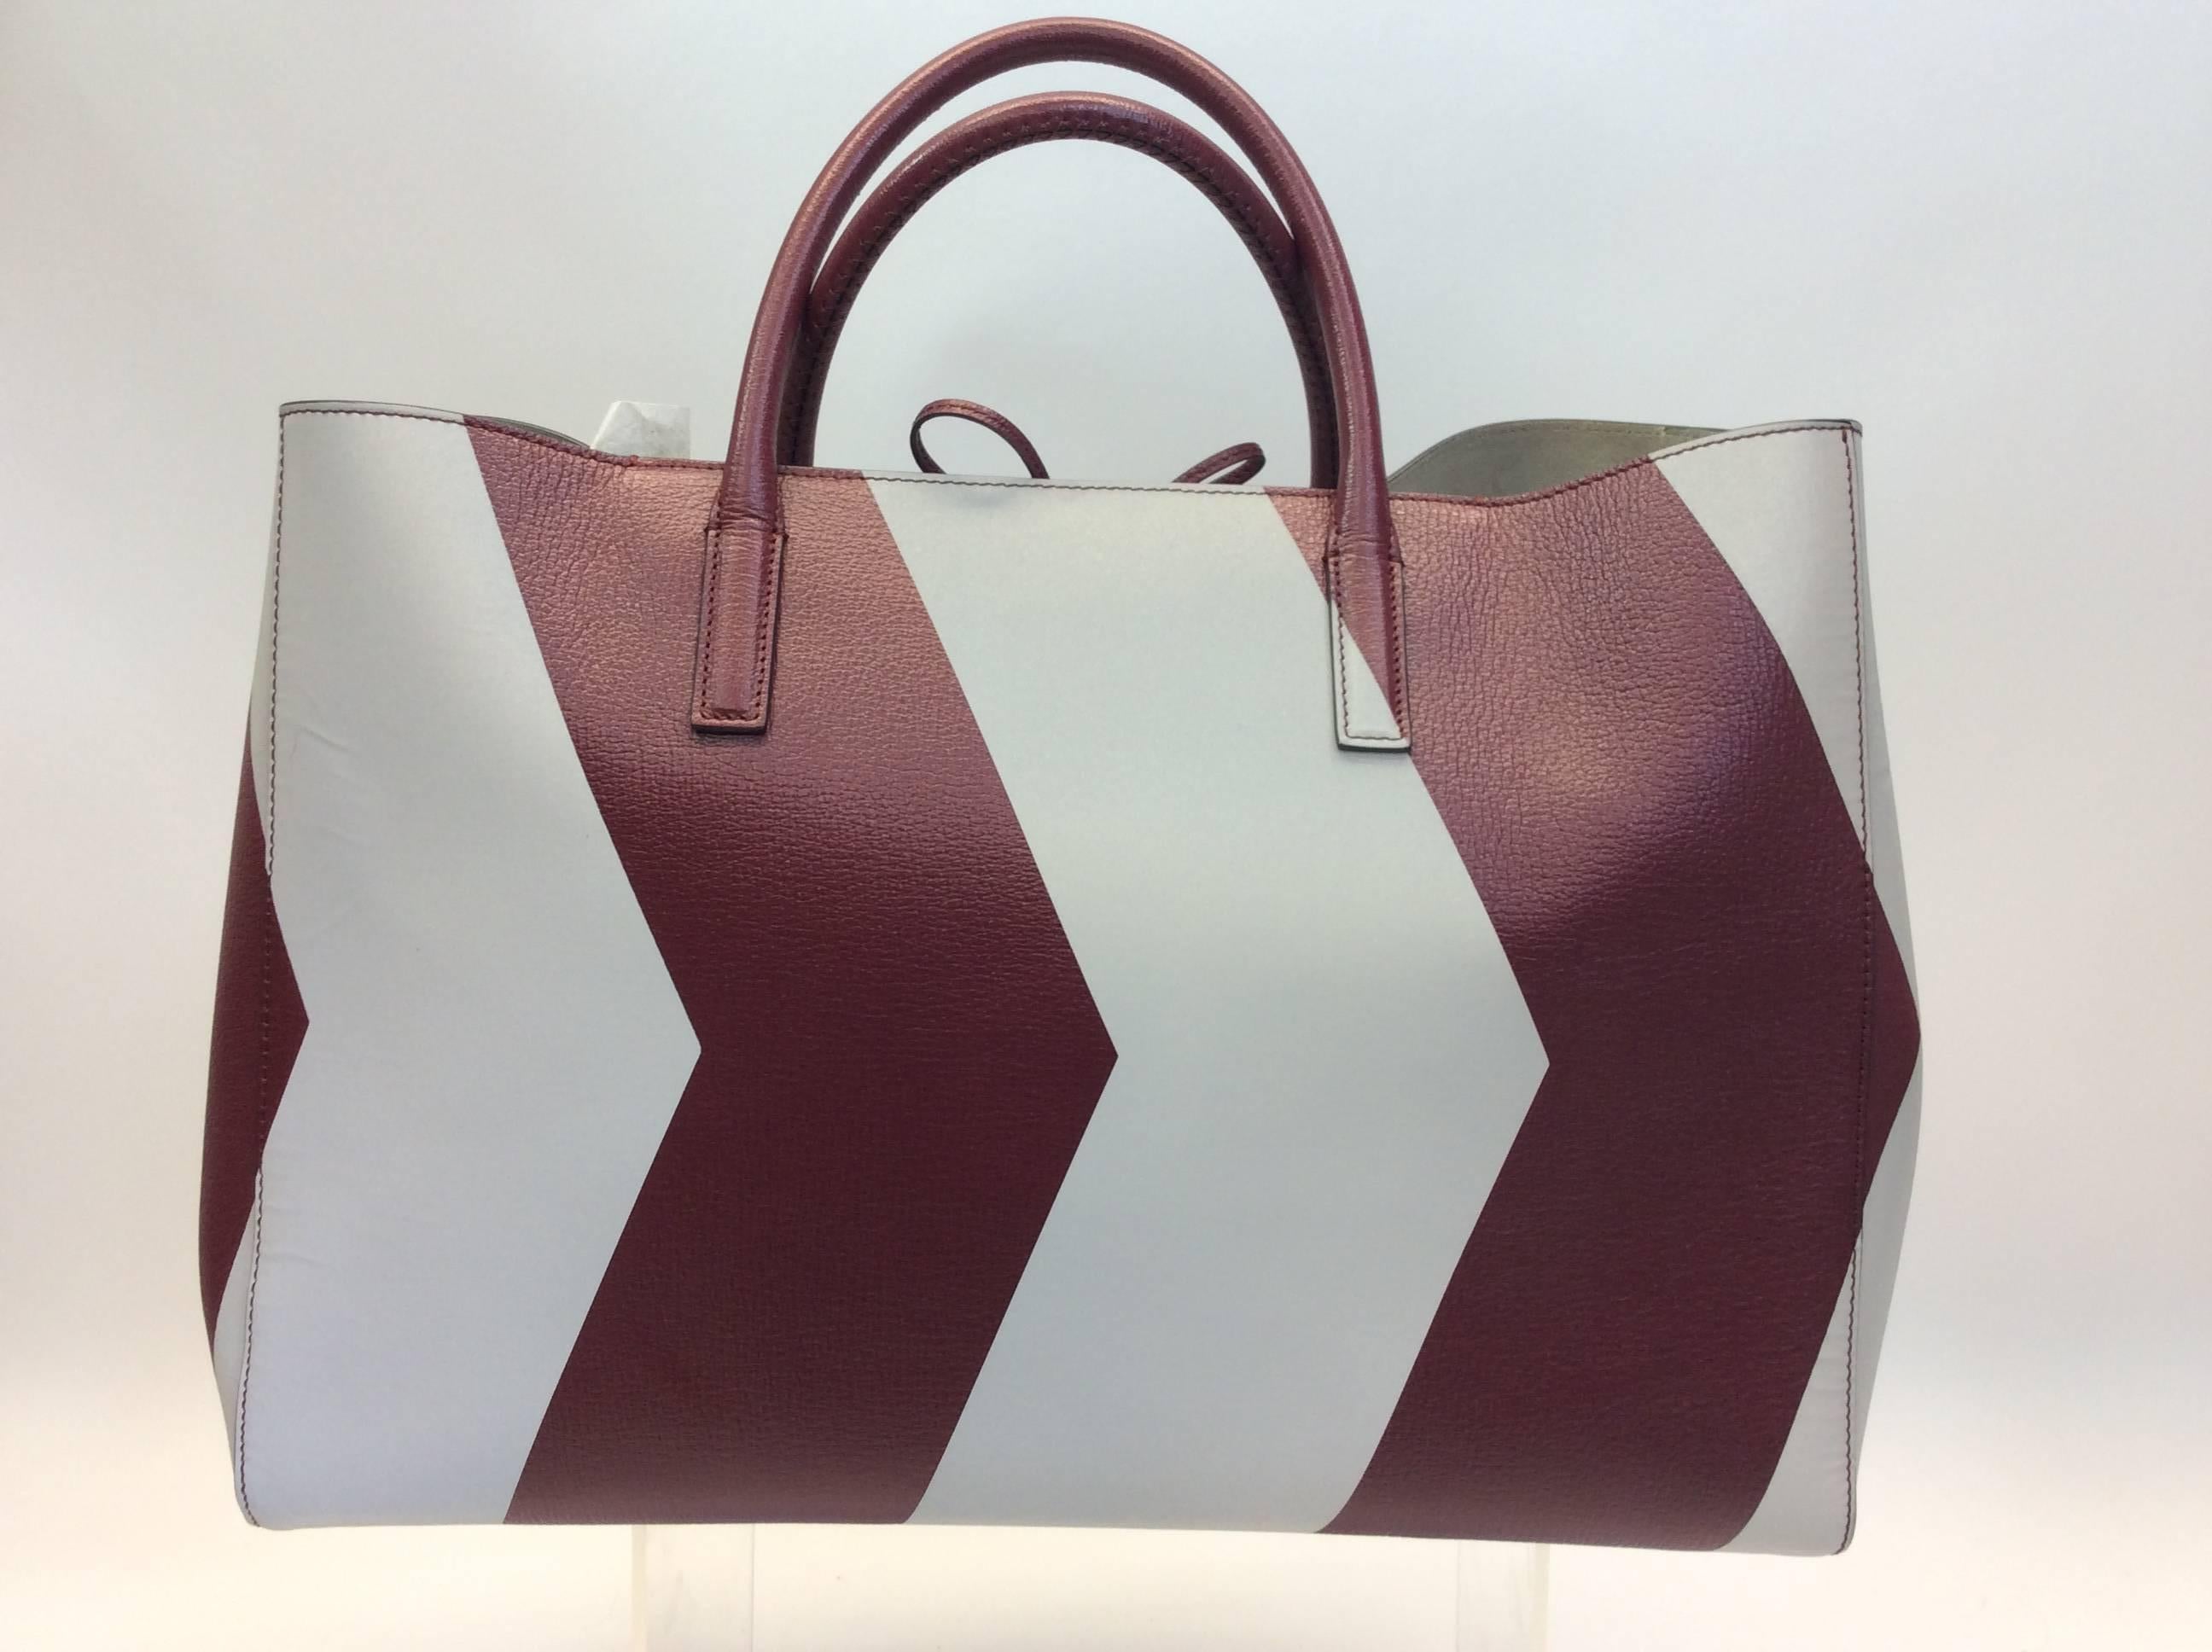 Gray Anya Hindmarch Burgandy and Grey Tote For Sale